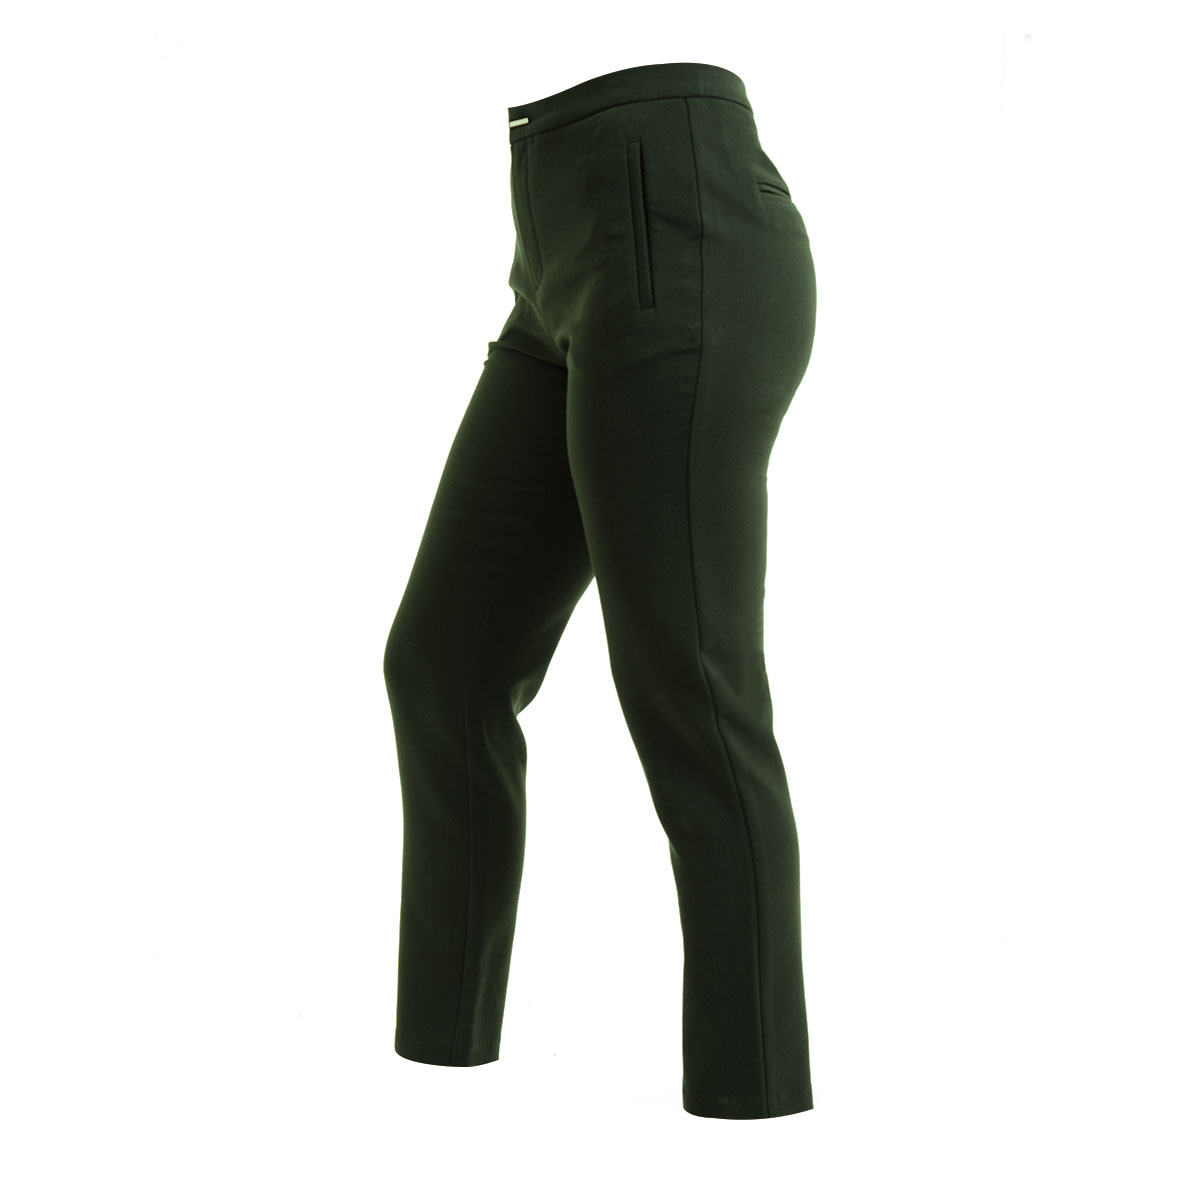 stretchy work trousers womens